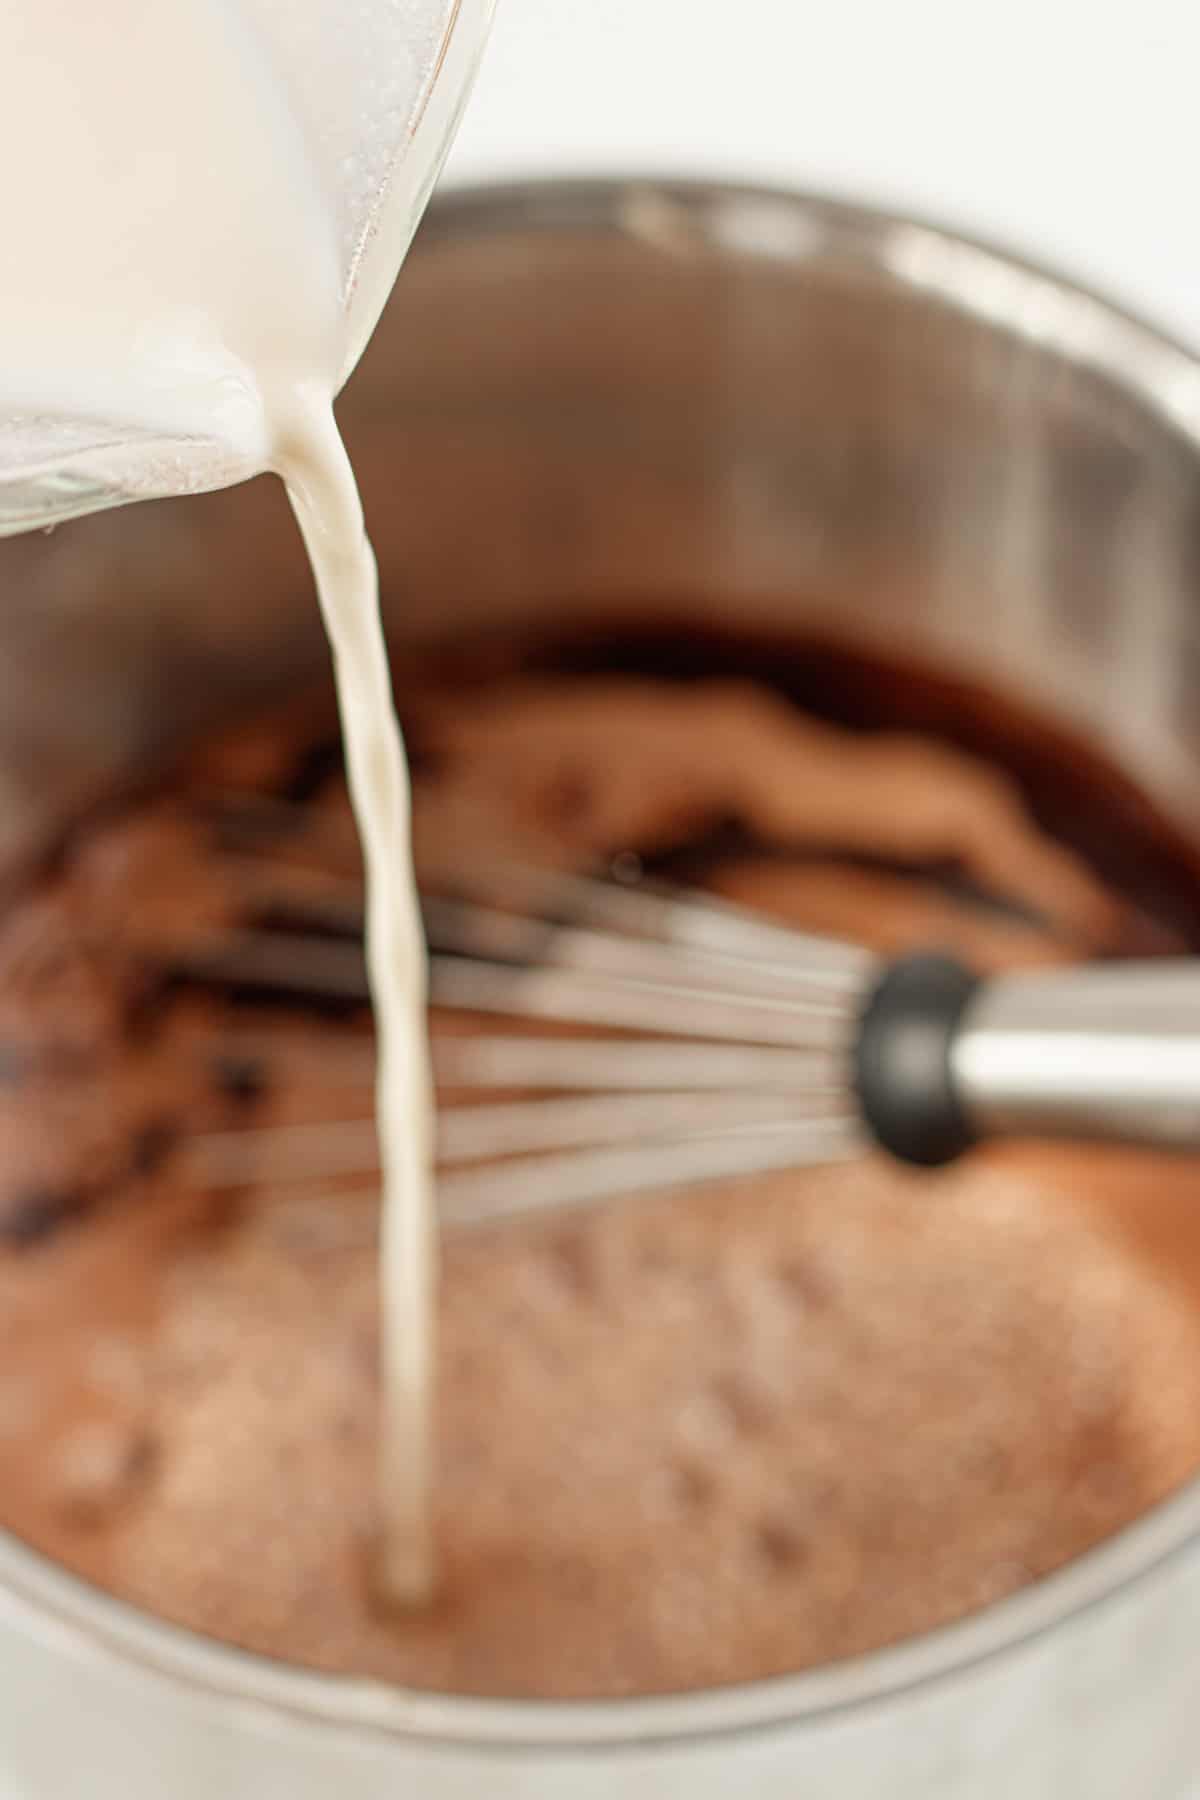 Pouring non-dairy milk into the stainless steel pot of hot cocoa.